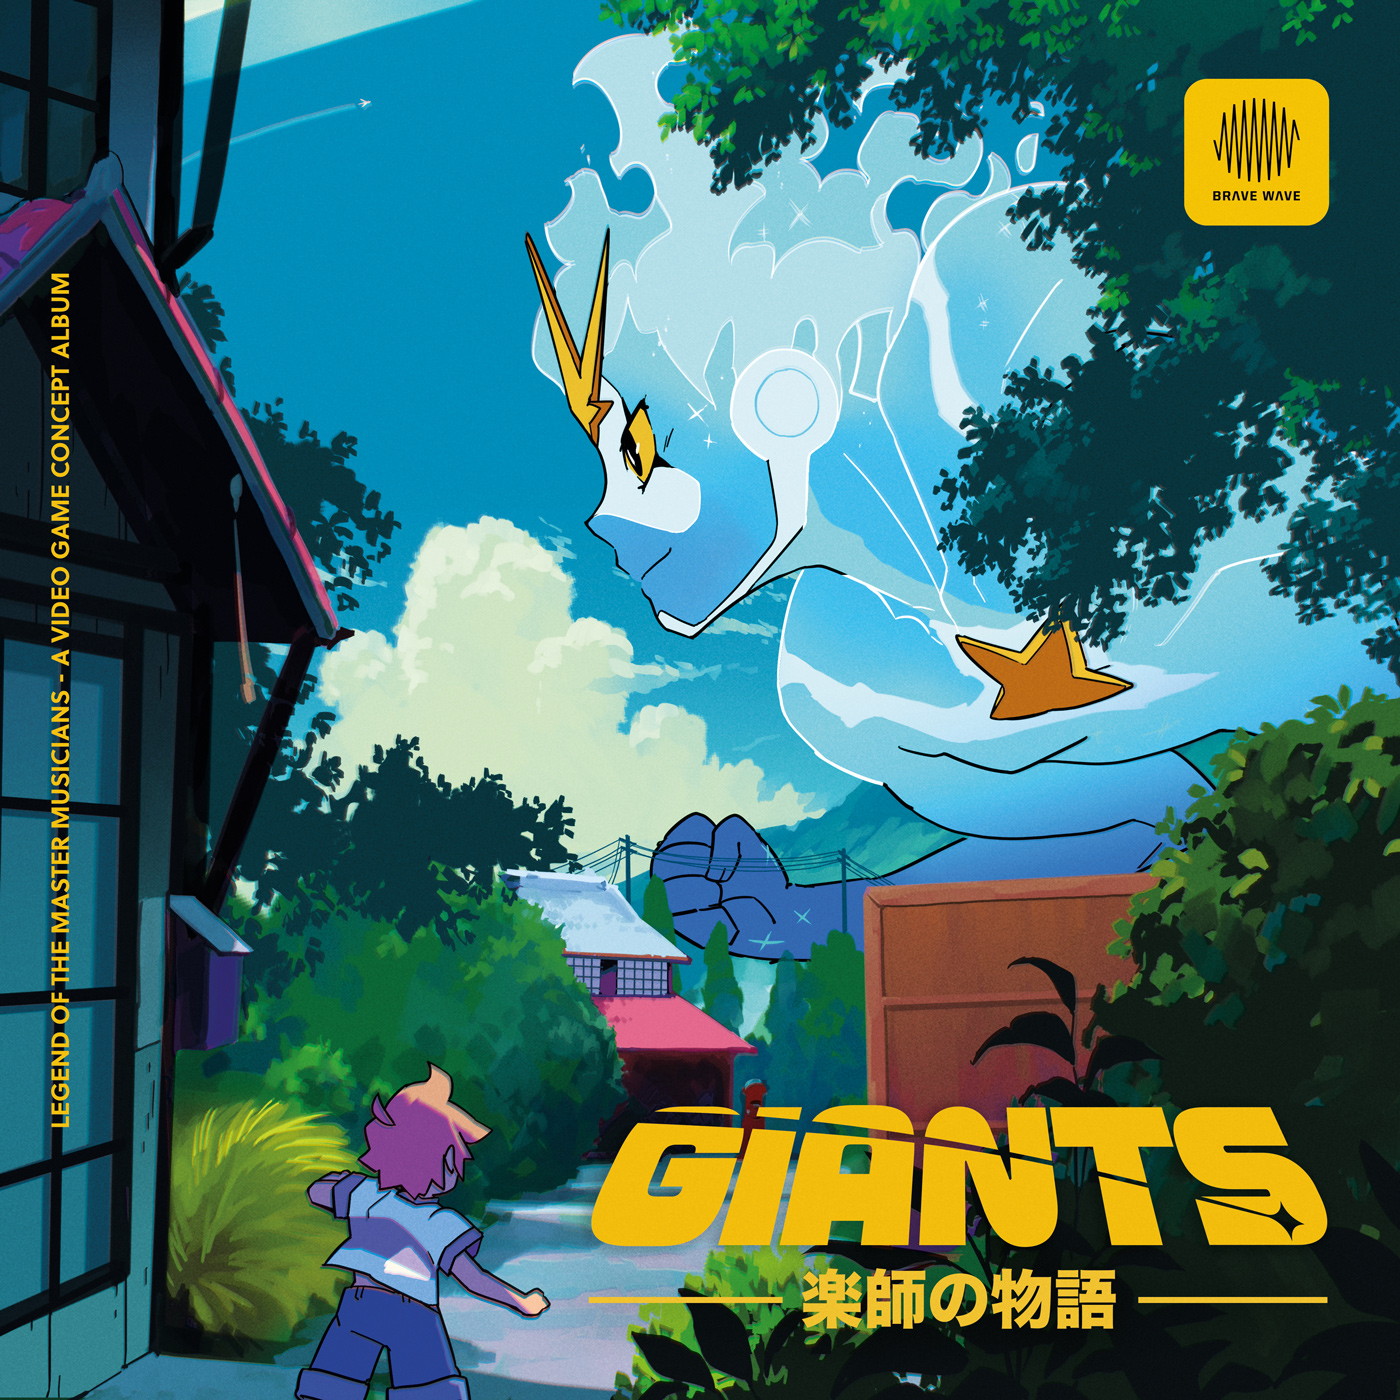 Giants, a New Album Featuring Panzer Dragoon Tracks, is Now Available to Pre-Order